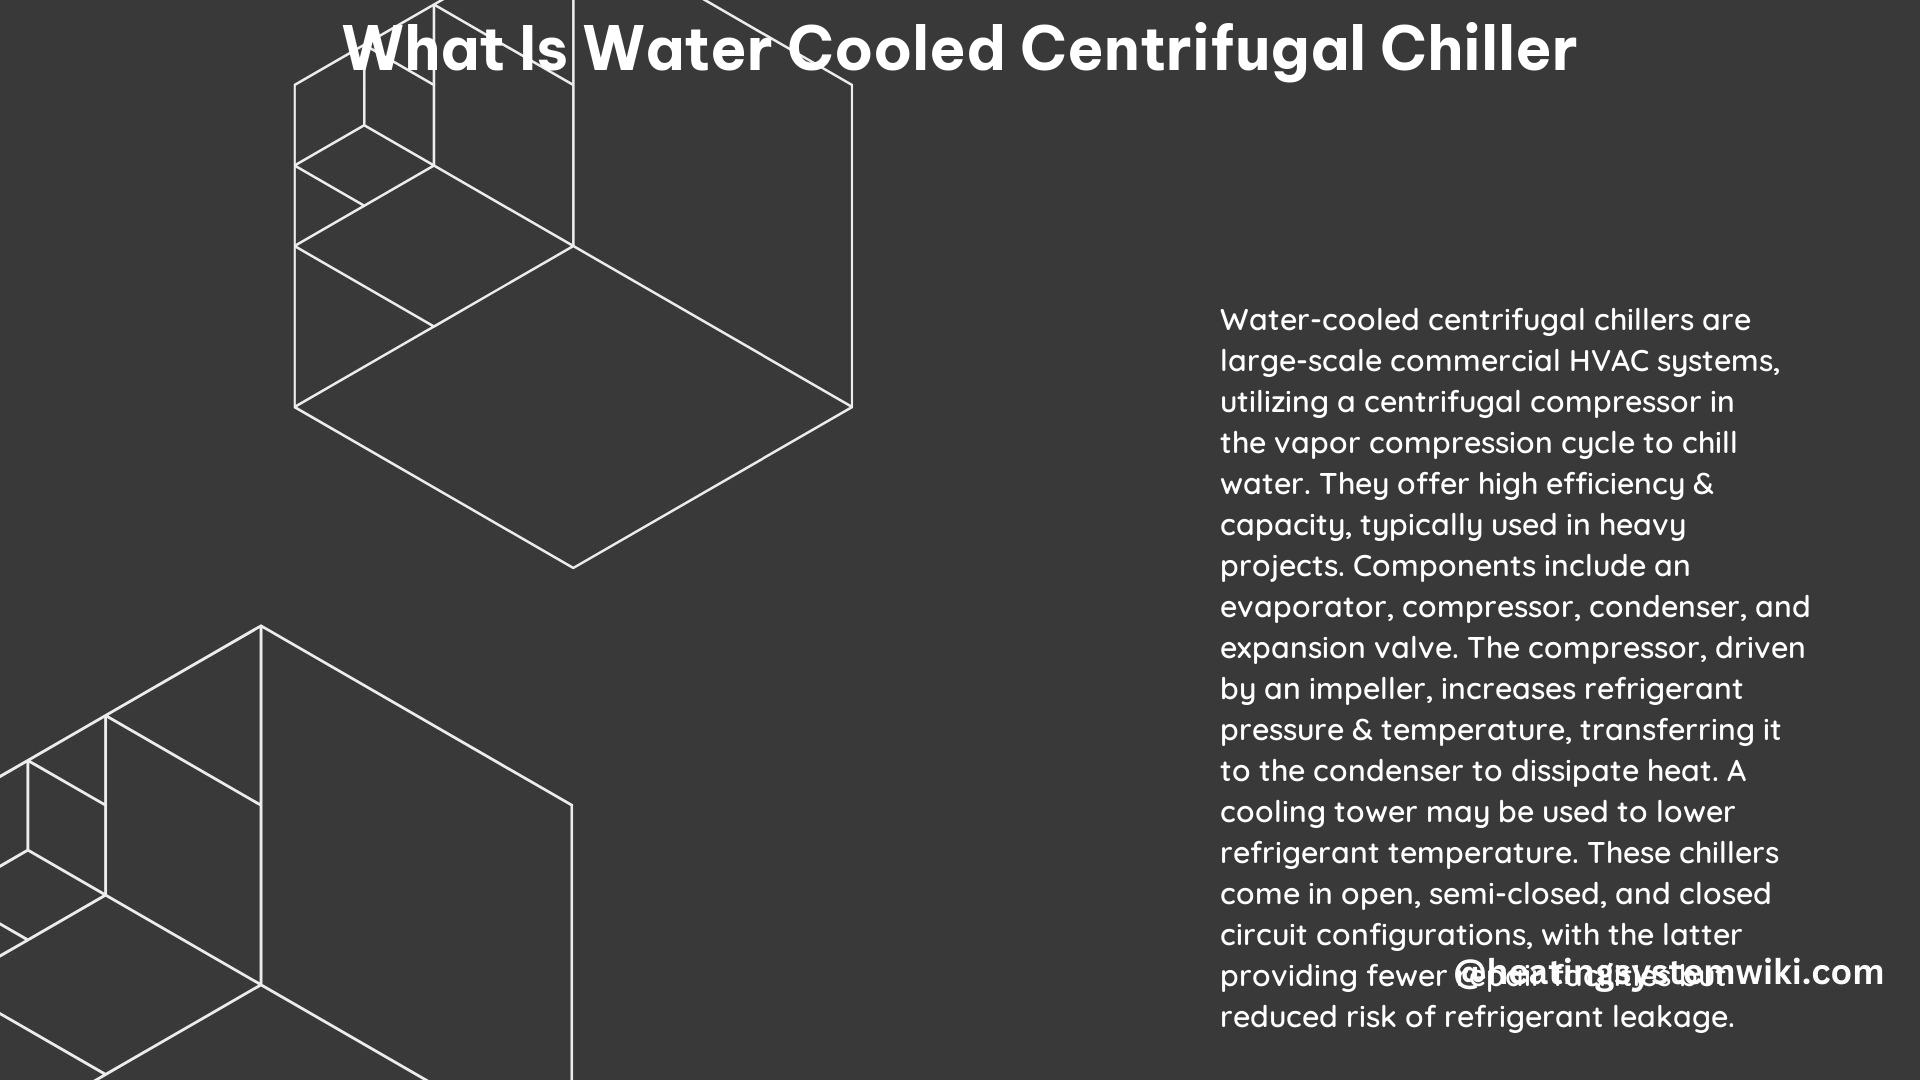 What Is Water Cooled Centrifugal Chiller